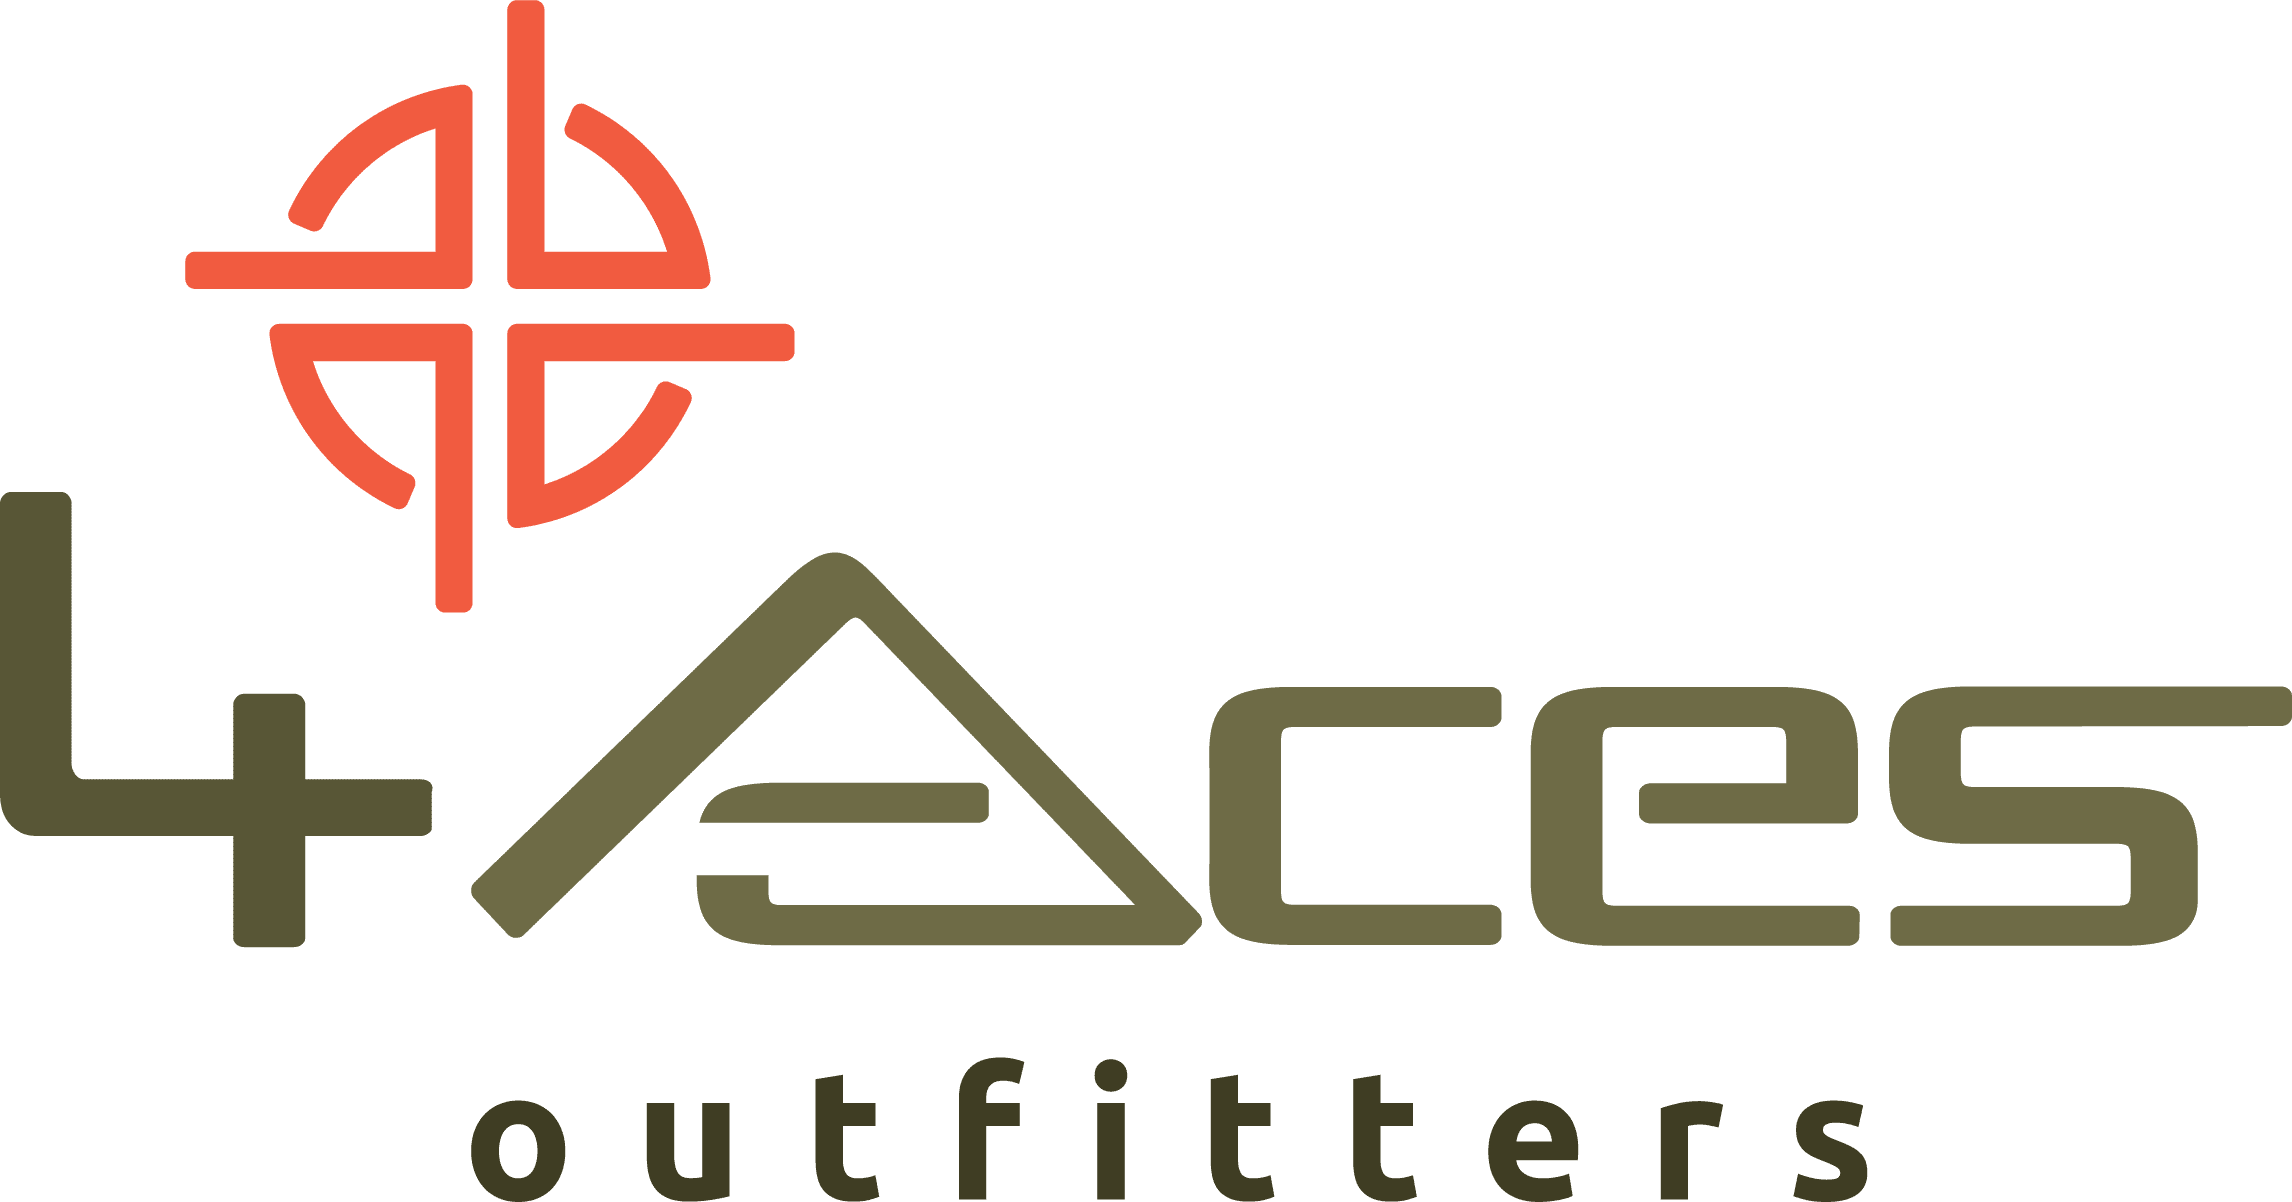 4Aces Safari Outfitters